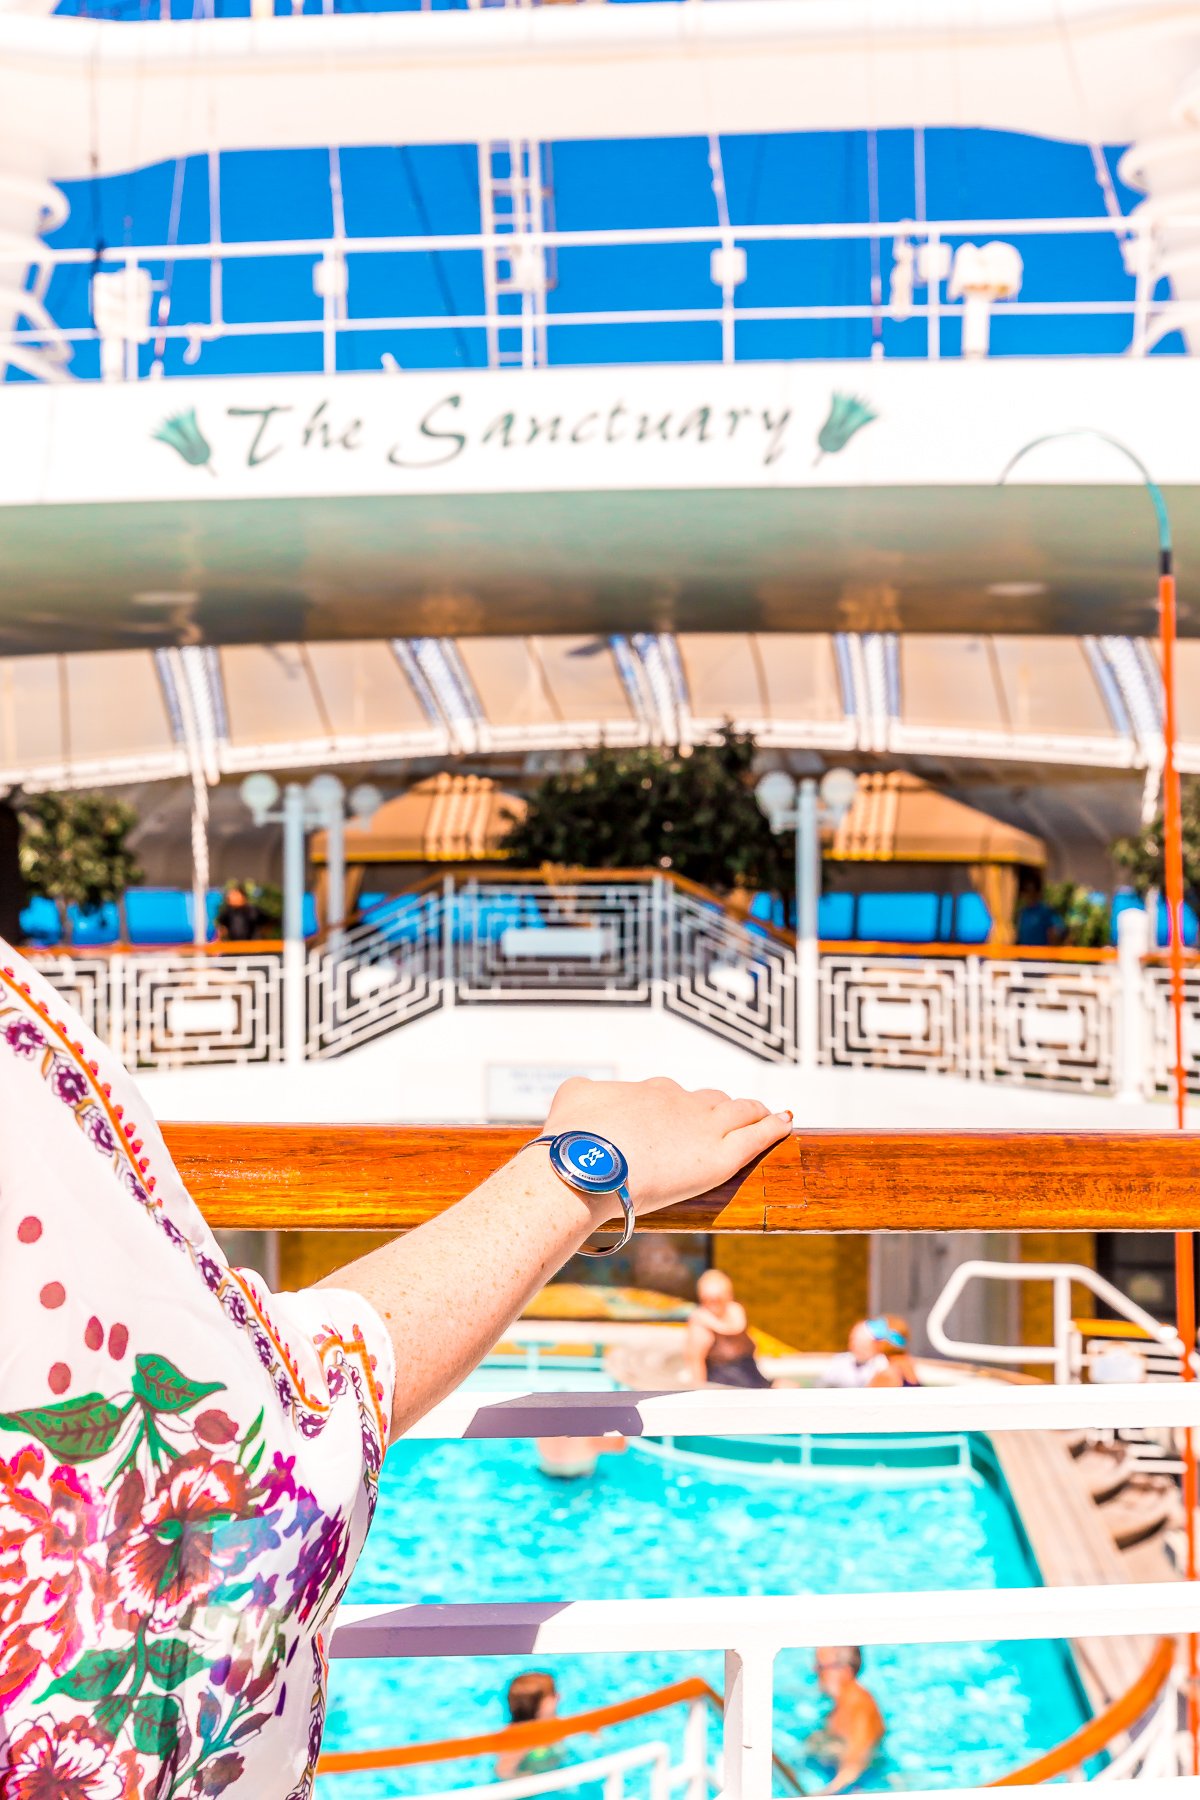 Woman's hand resting on a railing on a cruise ship.